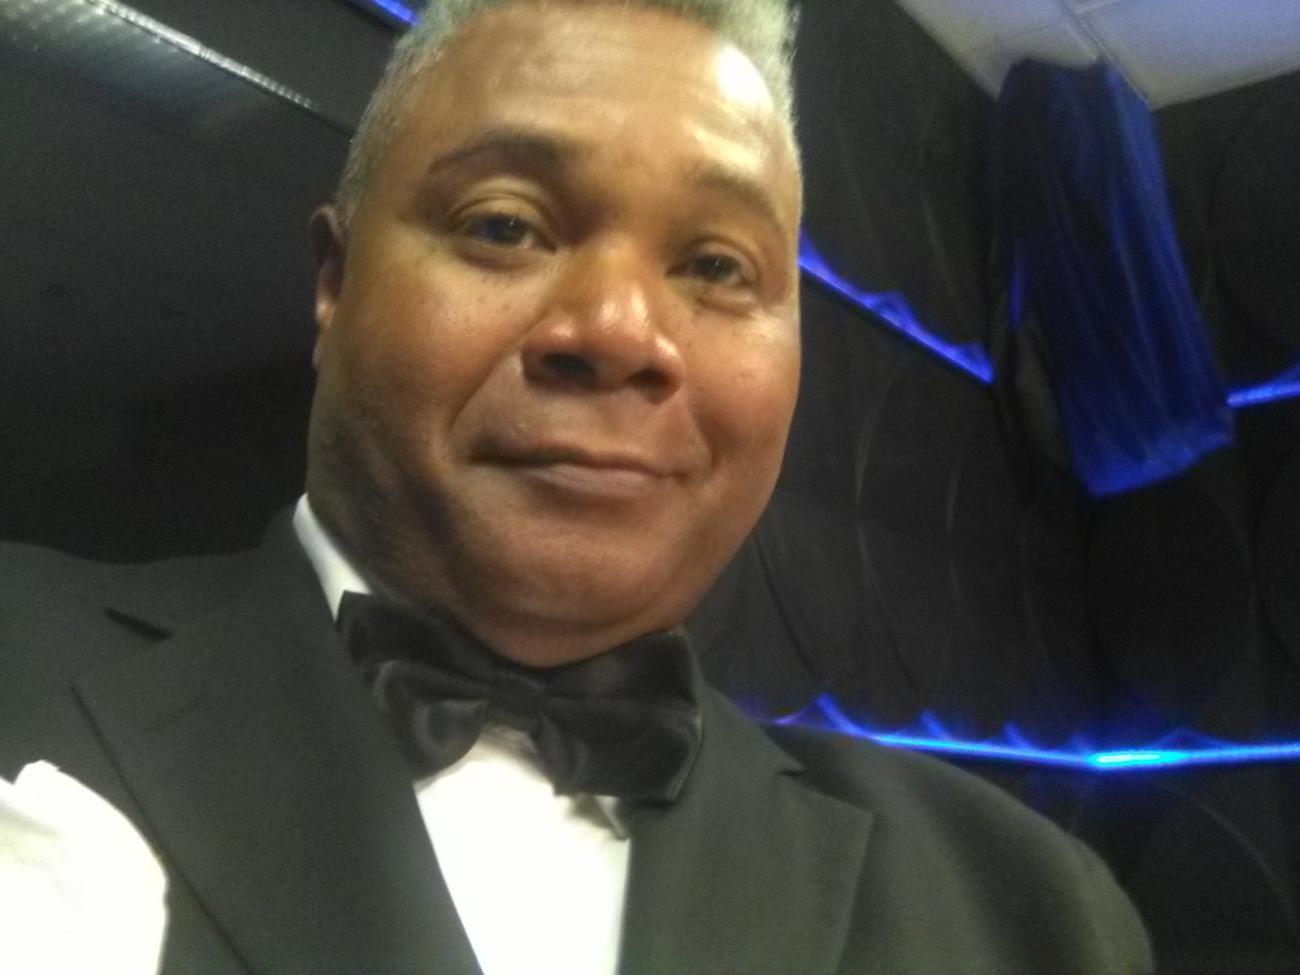 Politics And Oscars: On his May 3, 2021 visit to The Actors Choice Ep. 7.18, Guest Actor Darryl Maximilian Robinson speaks of political views and Oscars wins with Host Ron Brewington in Hollywood.